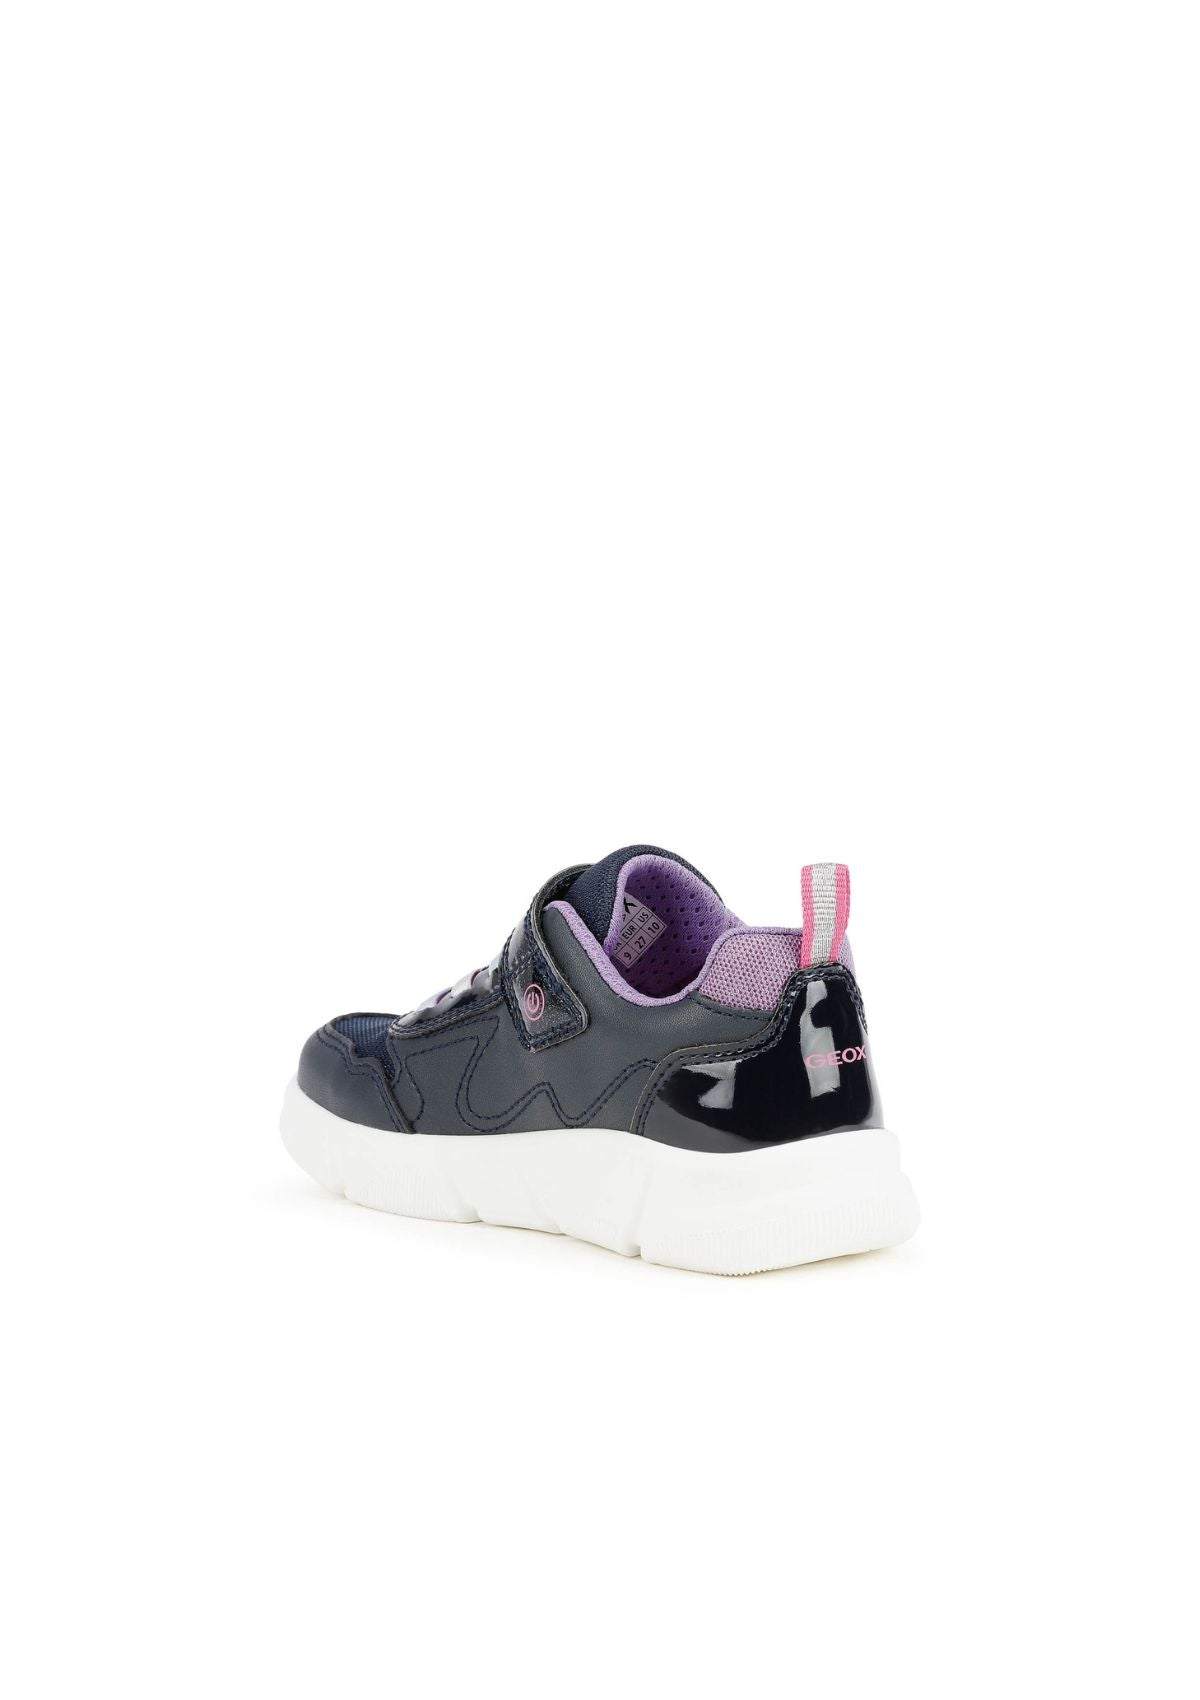 Geox Girls Trainers ARIL Lights-up Navy Lilac back